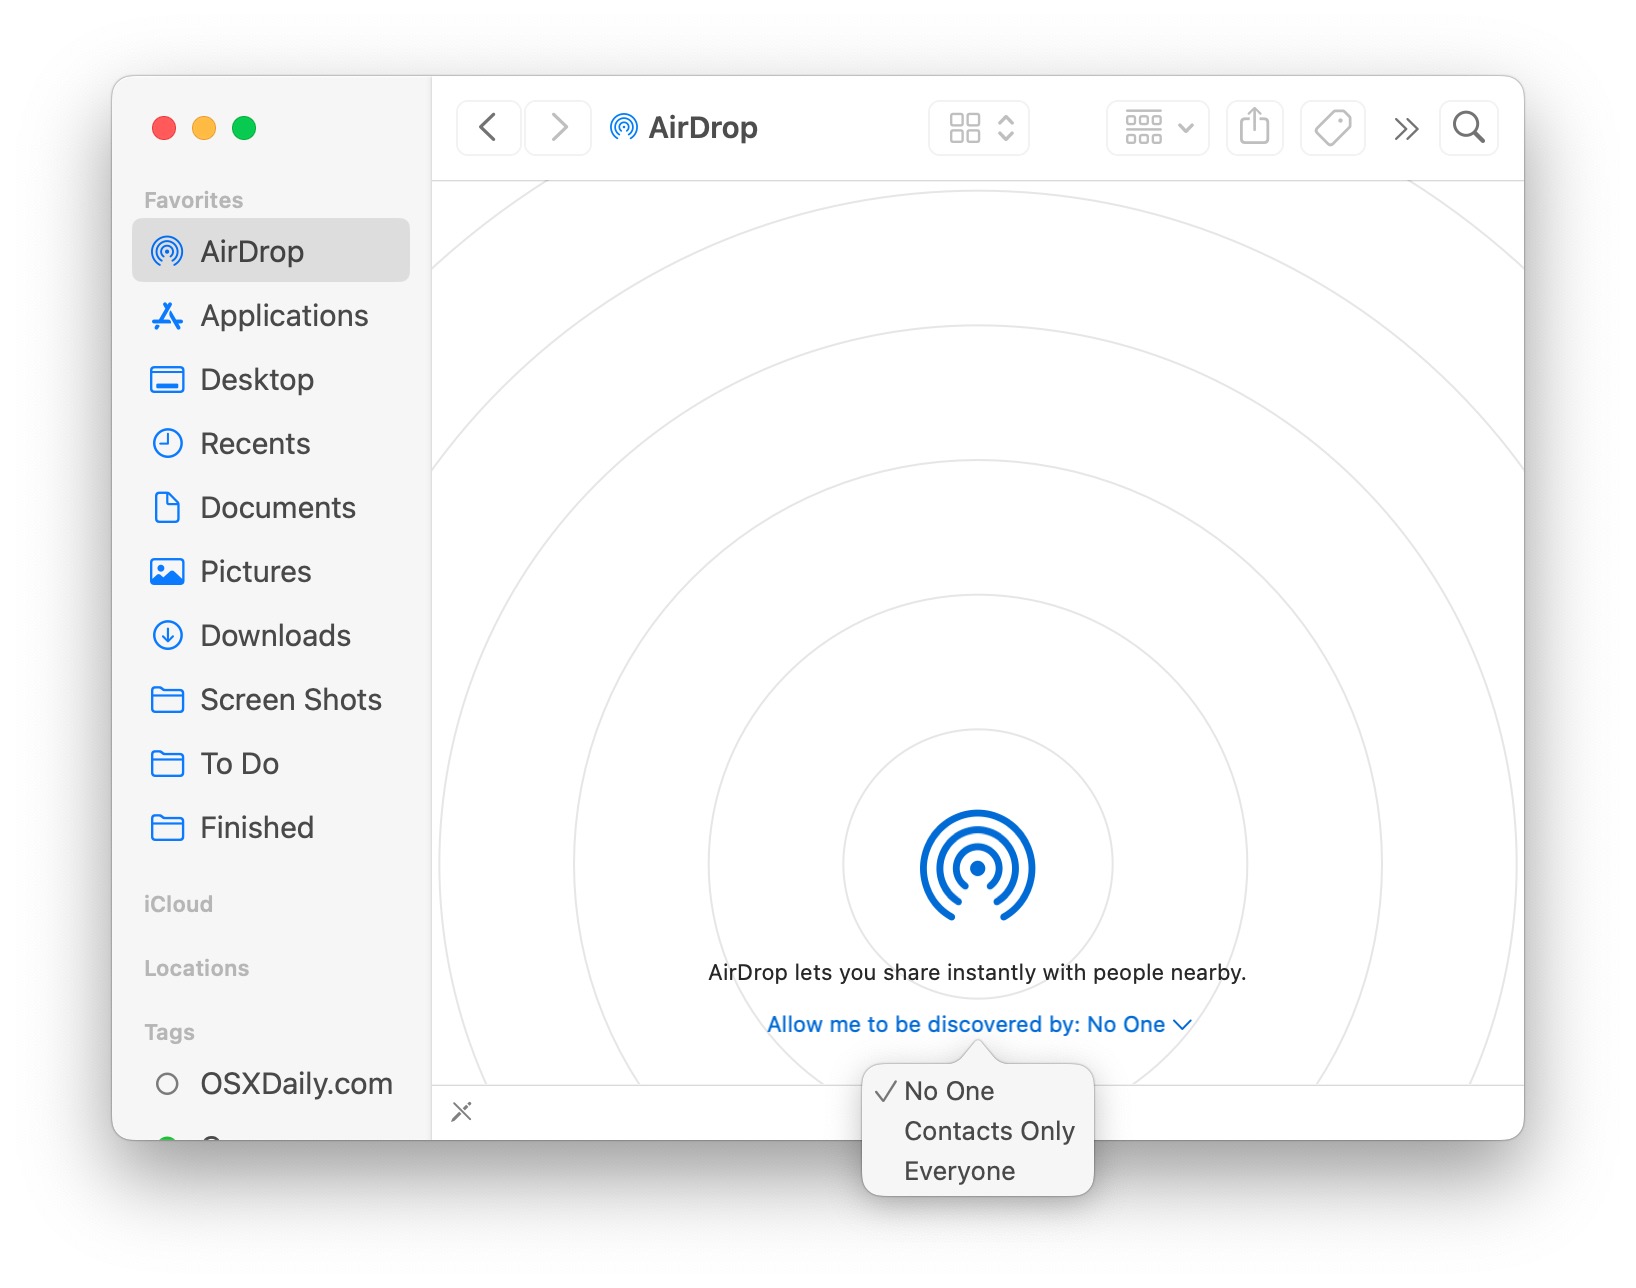 How to Disable AirDrop on Mac